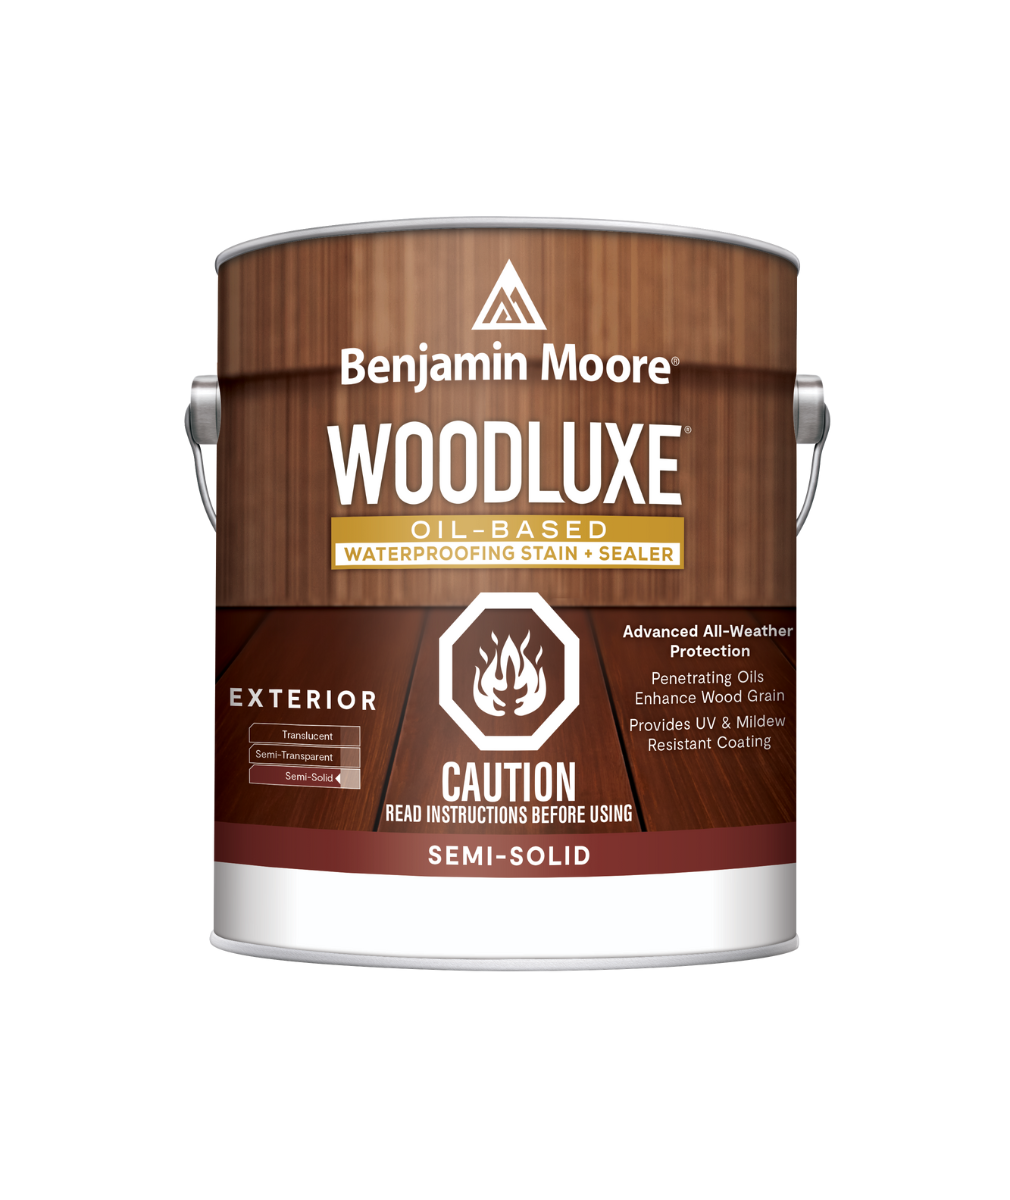 Benjamin Moore Woodluxe® Oil-Based Semi-Solid Exterior Stain available to shop at Regal Paint Centers in Maryland, Virginia and DC.  